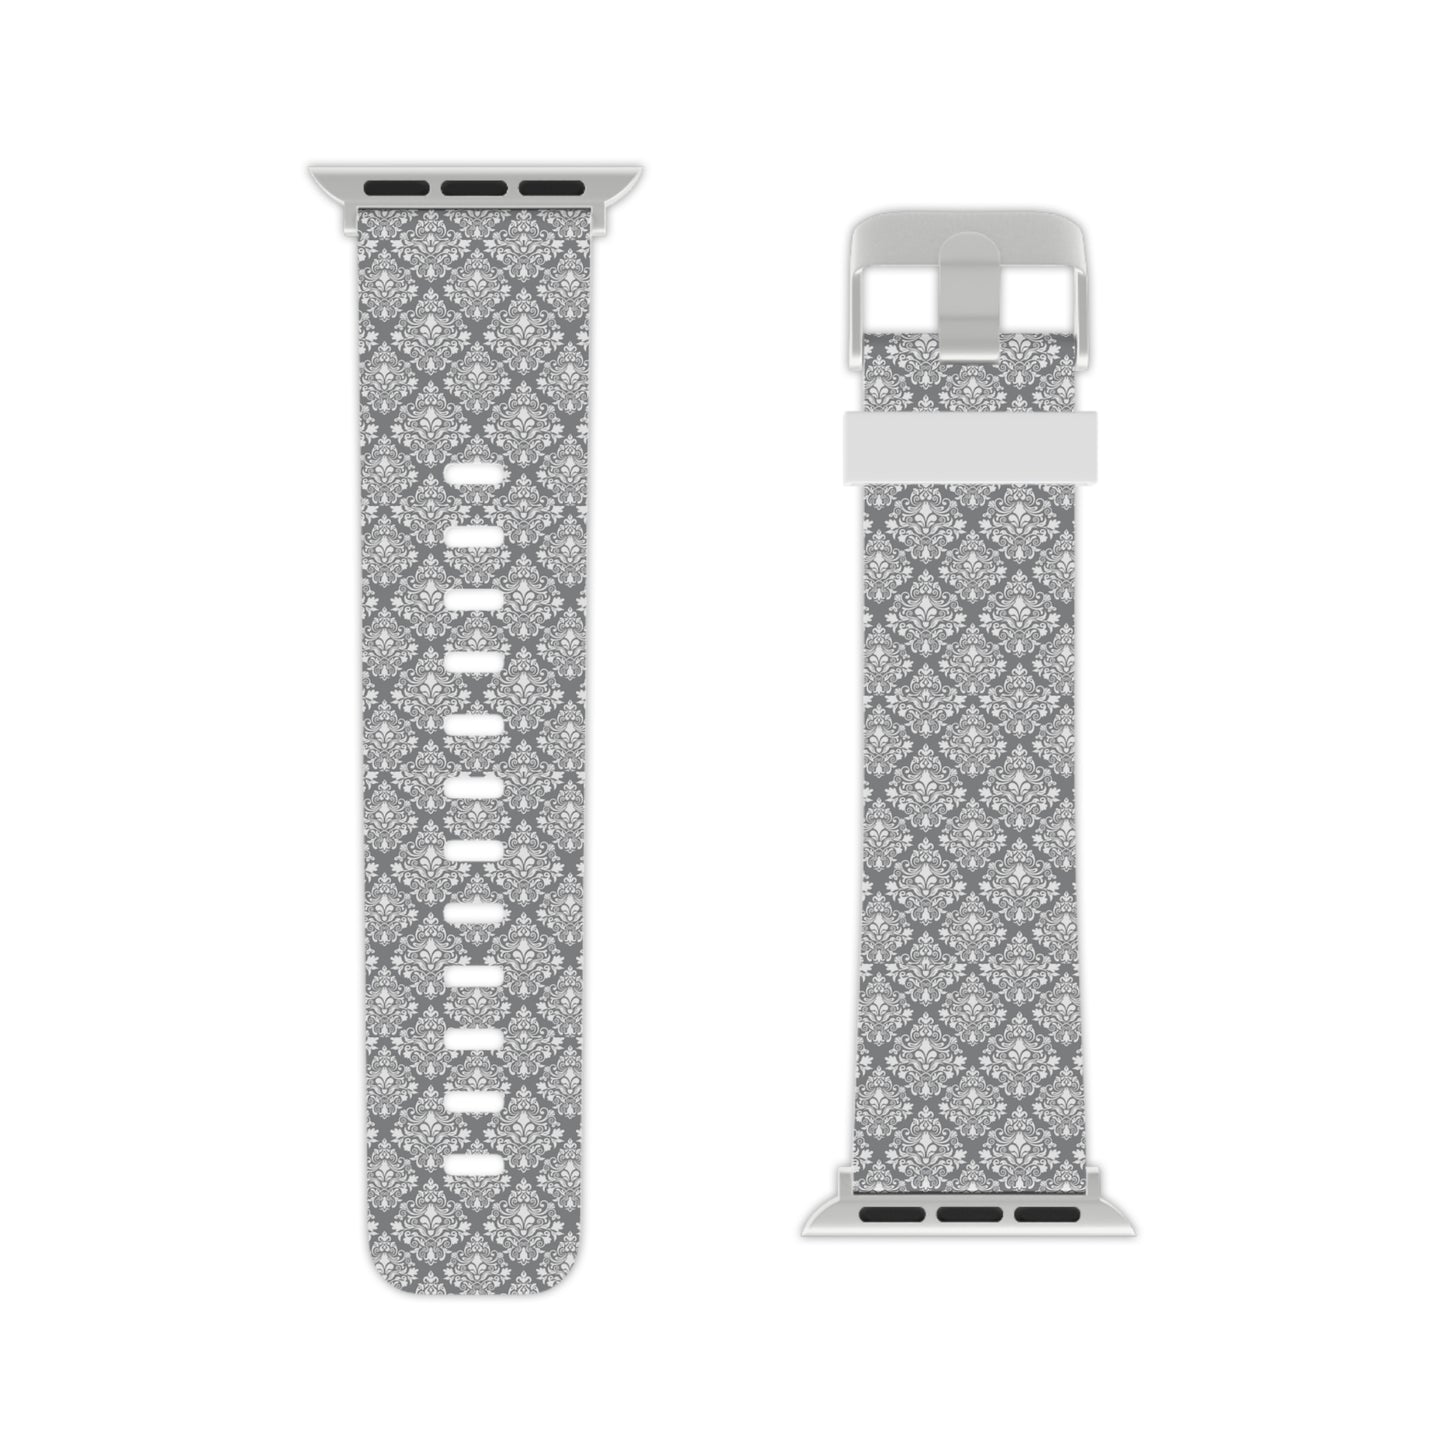 Grey and White Damask - Watch Band for Apple Watch